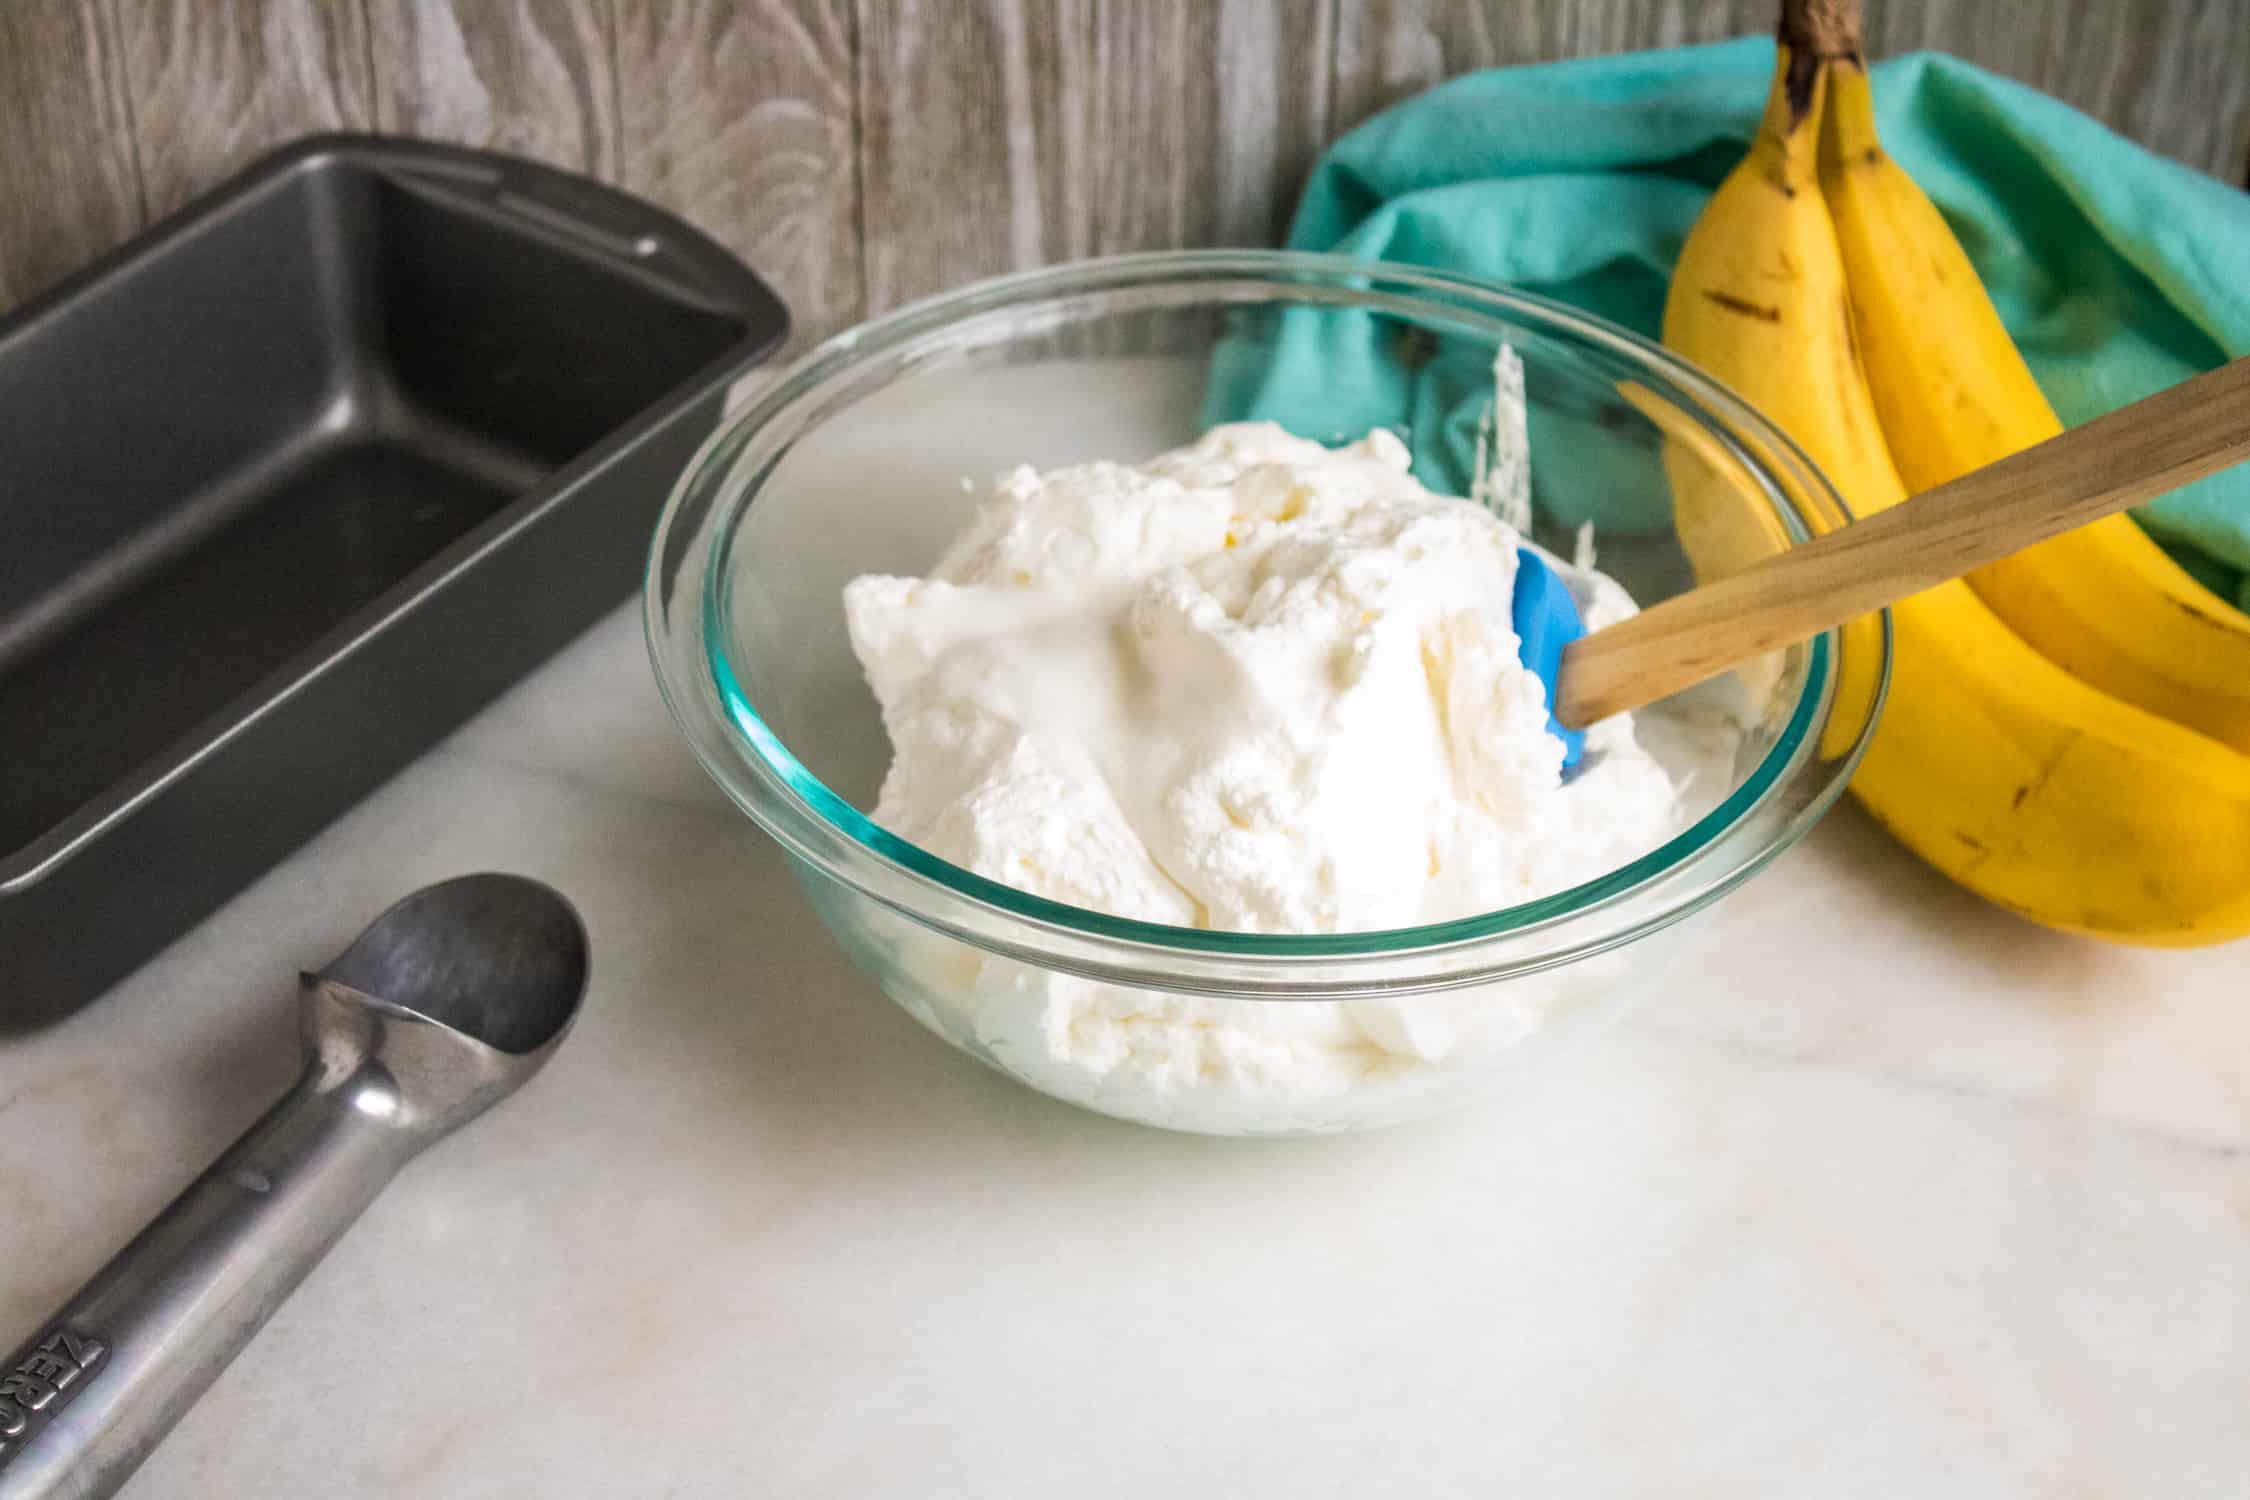 thick, heavy whipping cream in a glass bowl set next to two bananas, blue cloth napkin, freezer safe container and an ice cream scoop